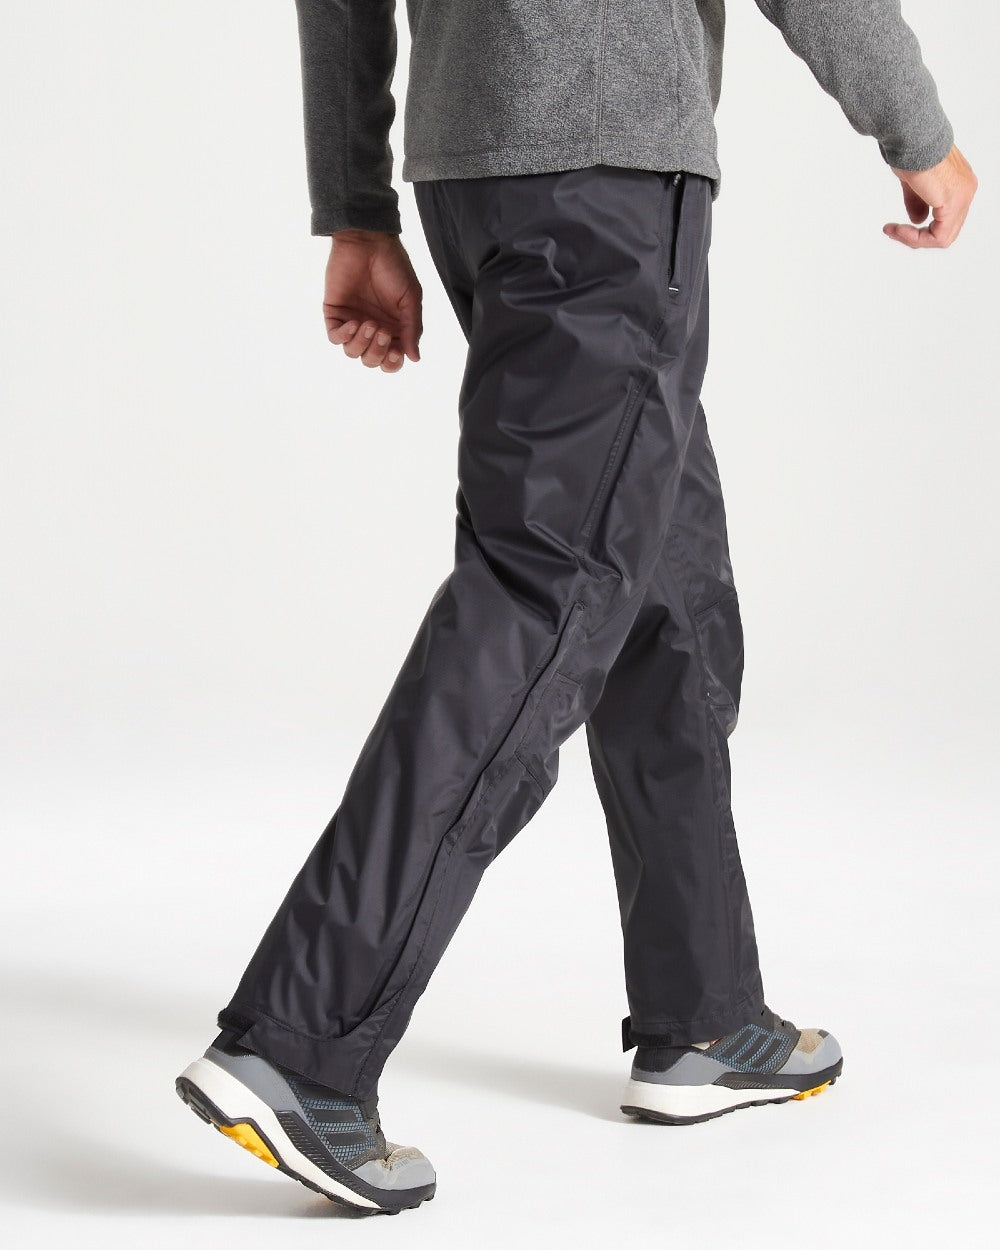 Craghoppers Ascent Waterproof Over Trousers in Black